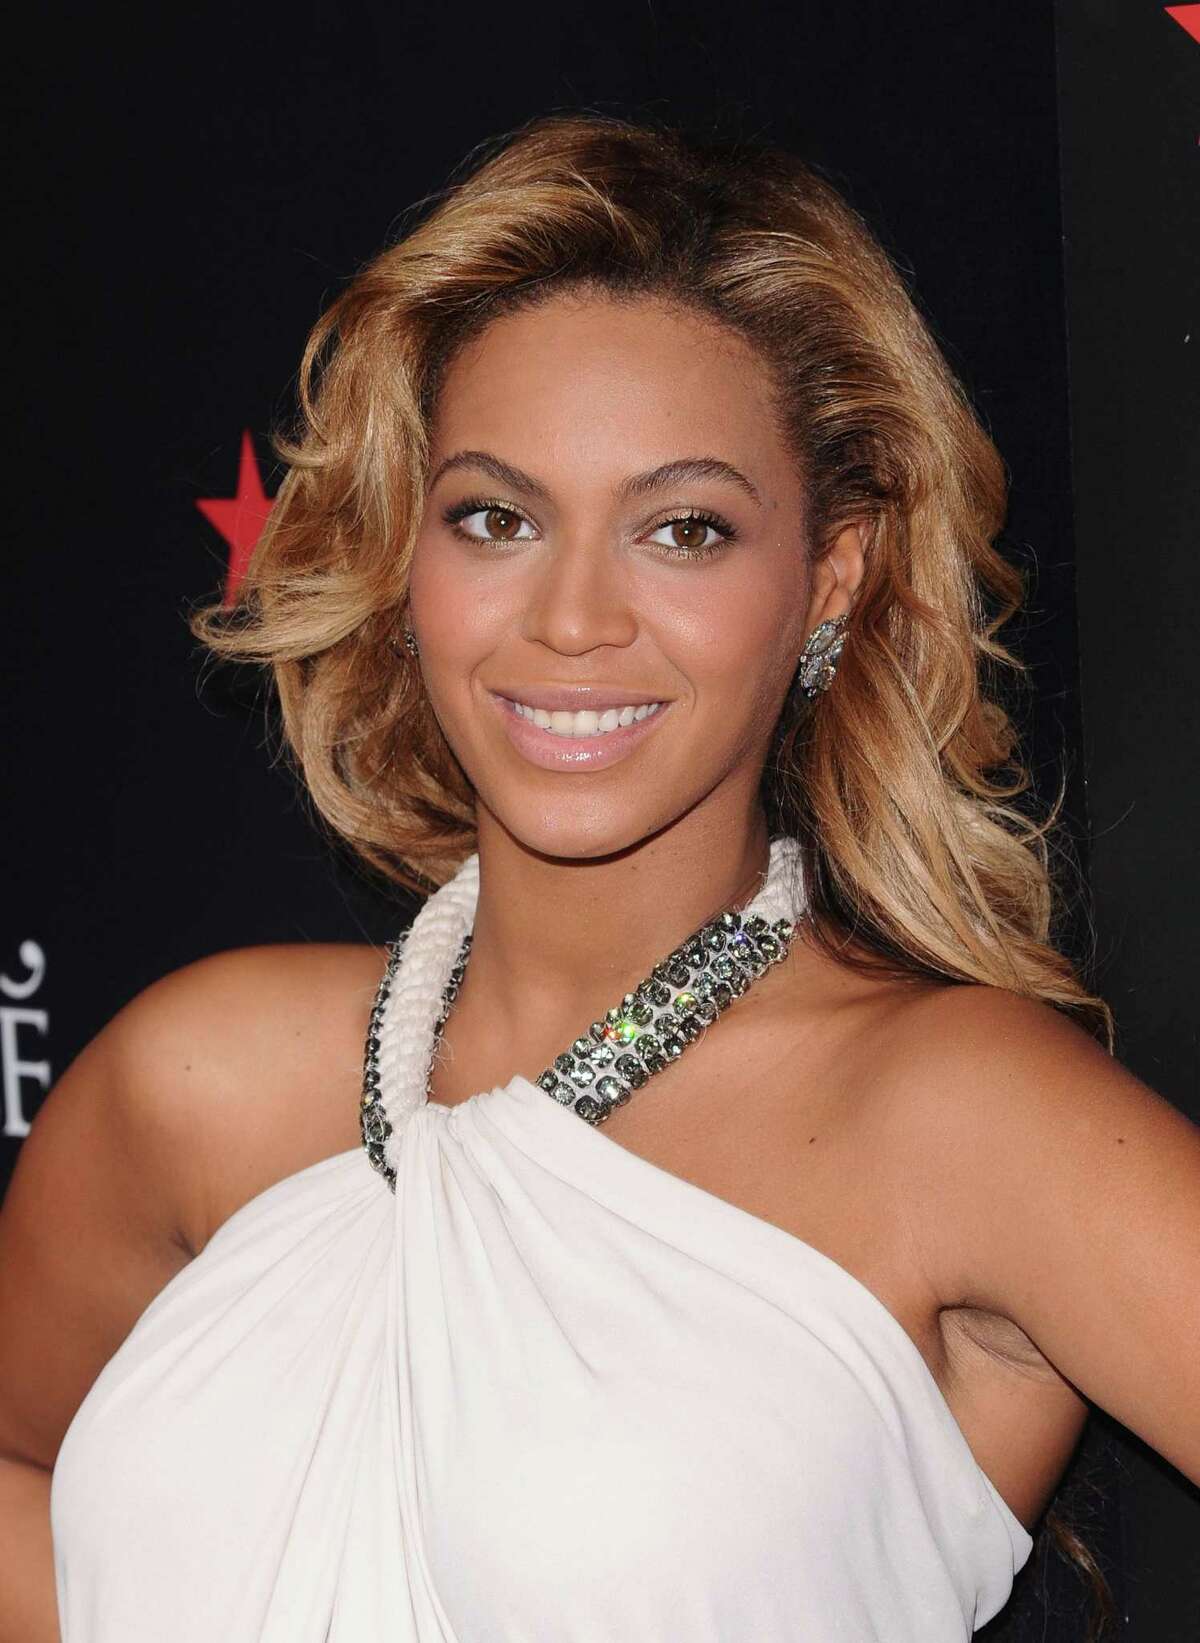 Singer Beyonce Knowles-Carter, shown in this file photo, supports higher education through scholarships administered via her BeyGood Foundation. A Texas Southern University student is one of eight recipients of a $25,000 scholarship in Beyonce’s Homecoming Scholars Award program.